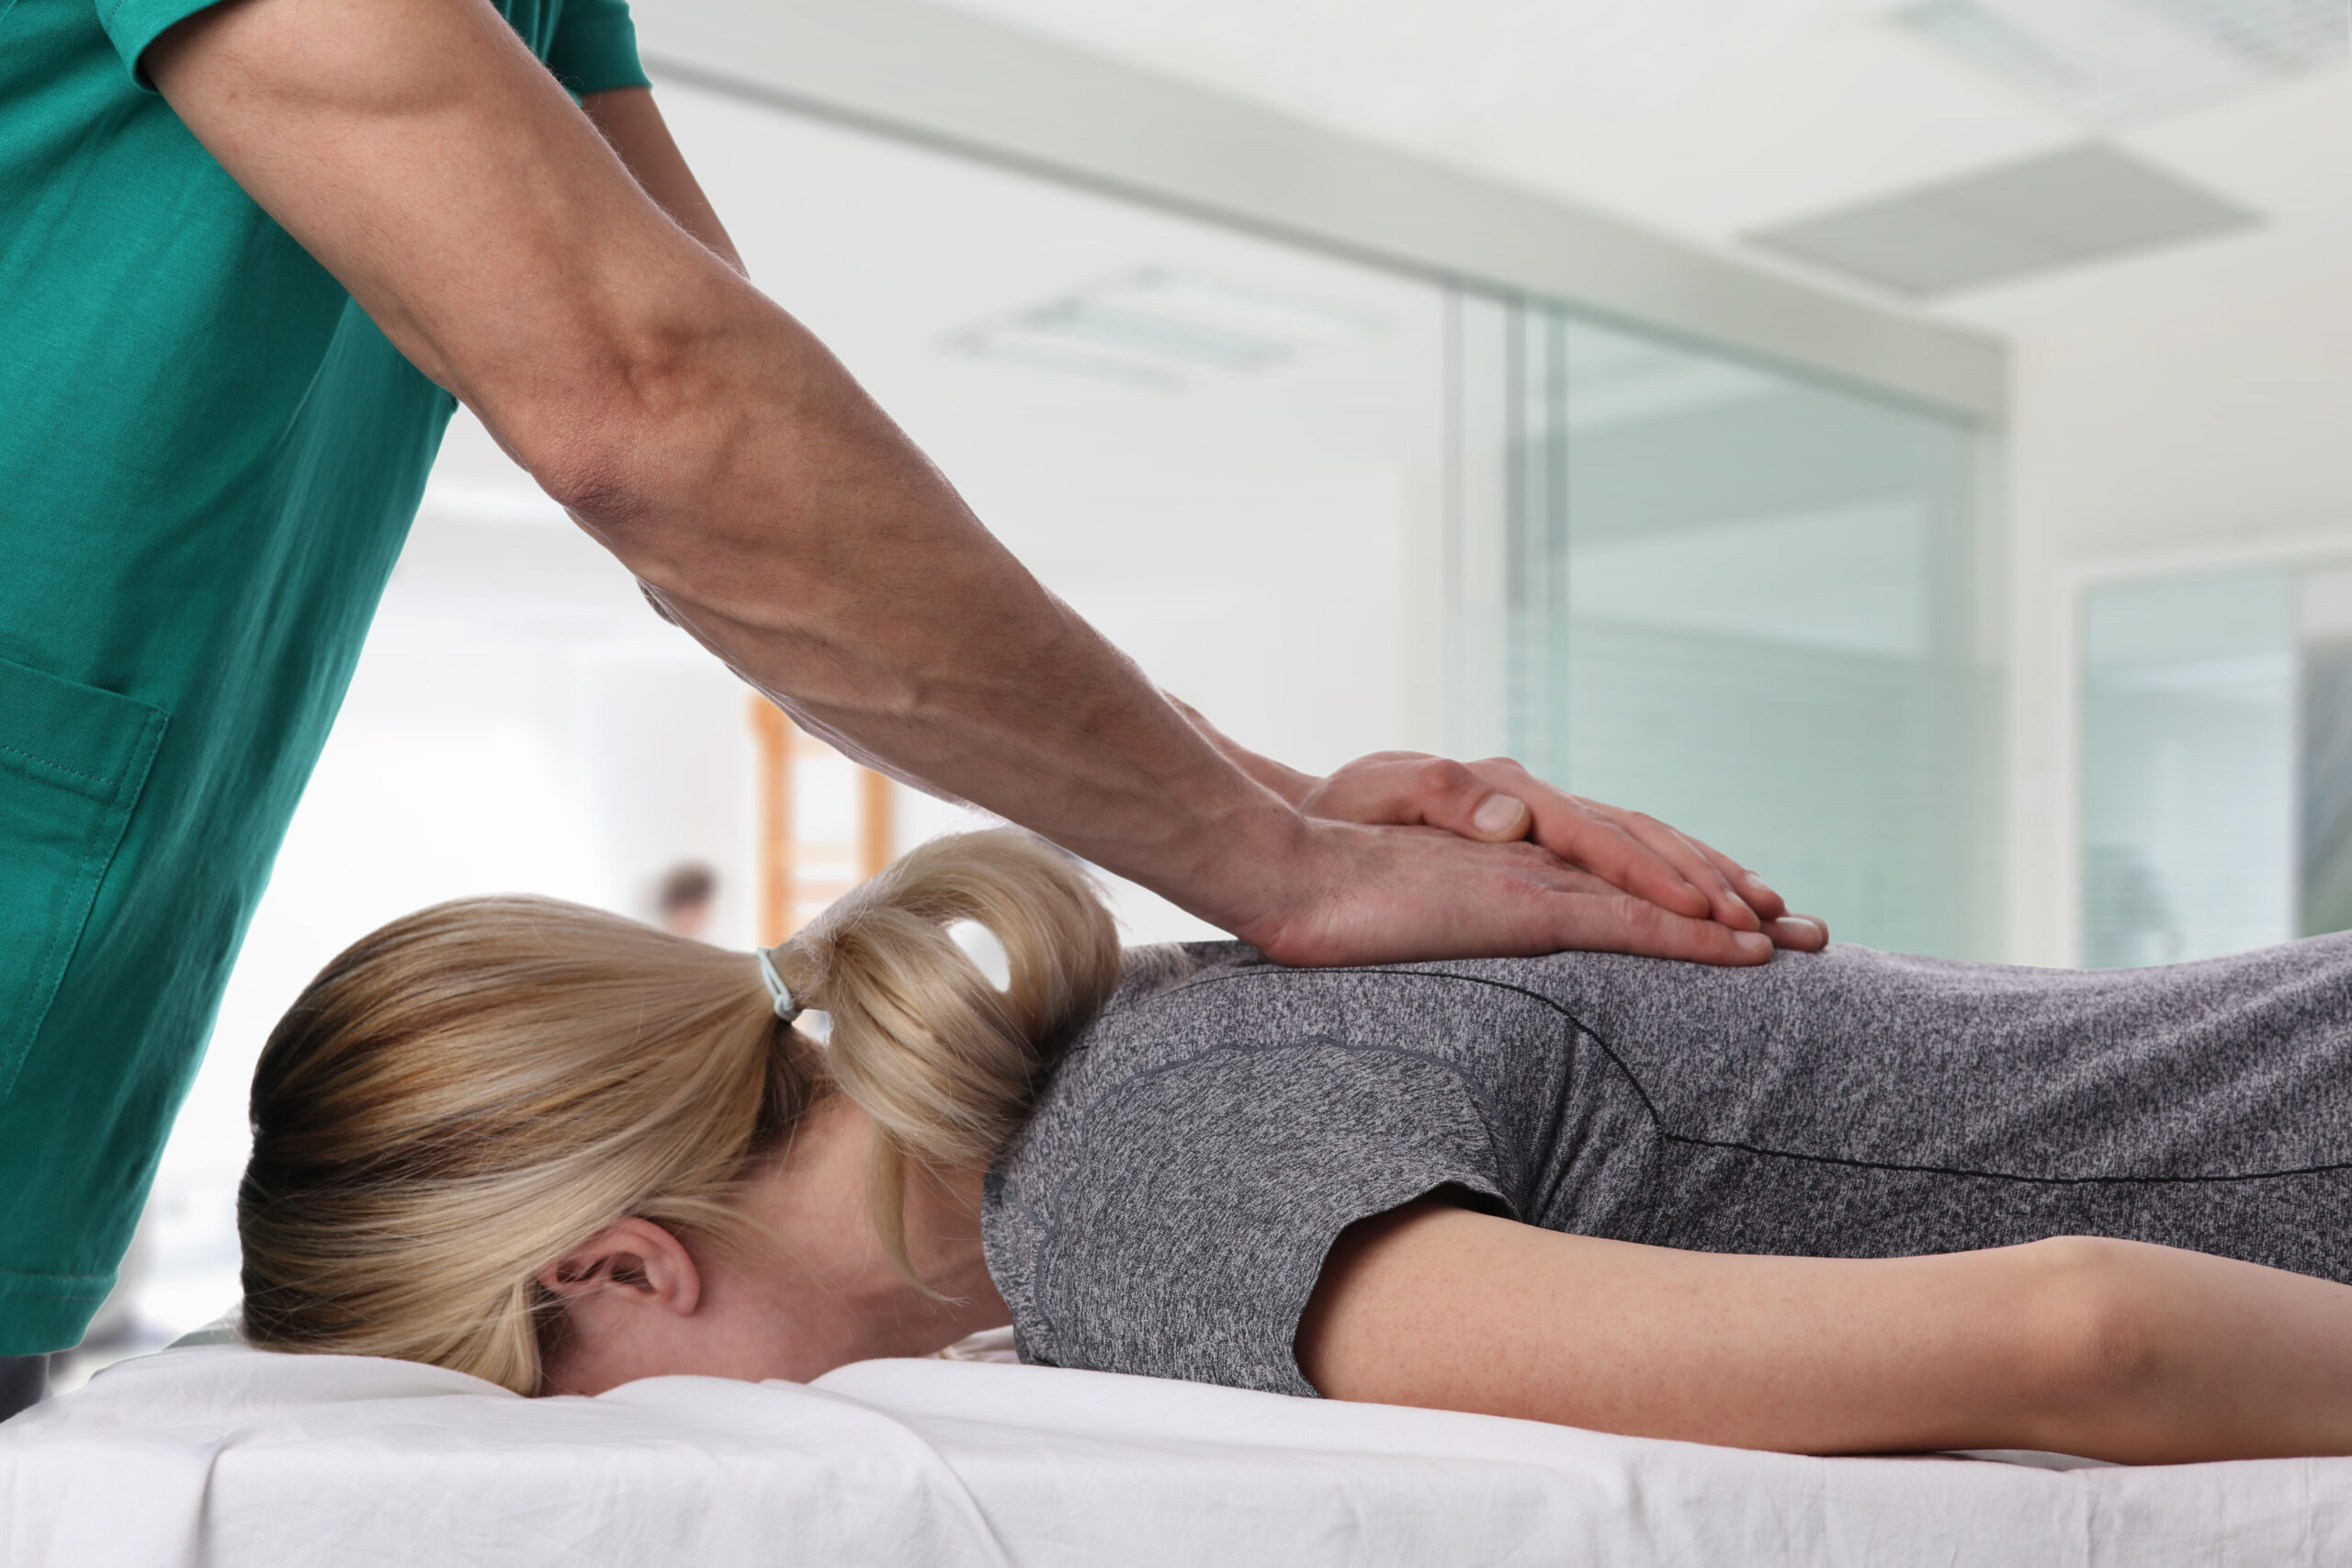 chiropractic care offers a multitude of benefits